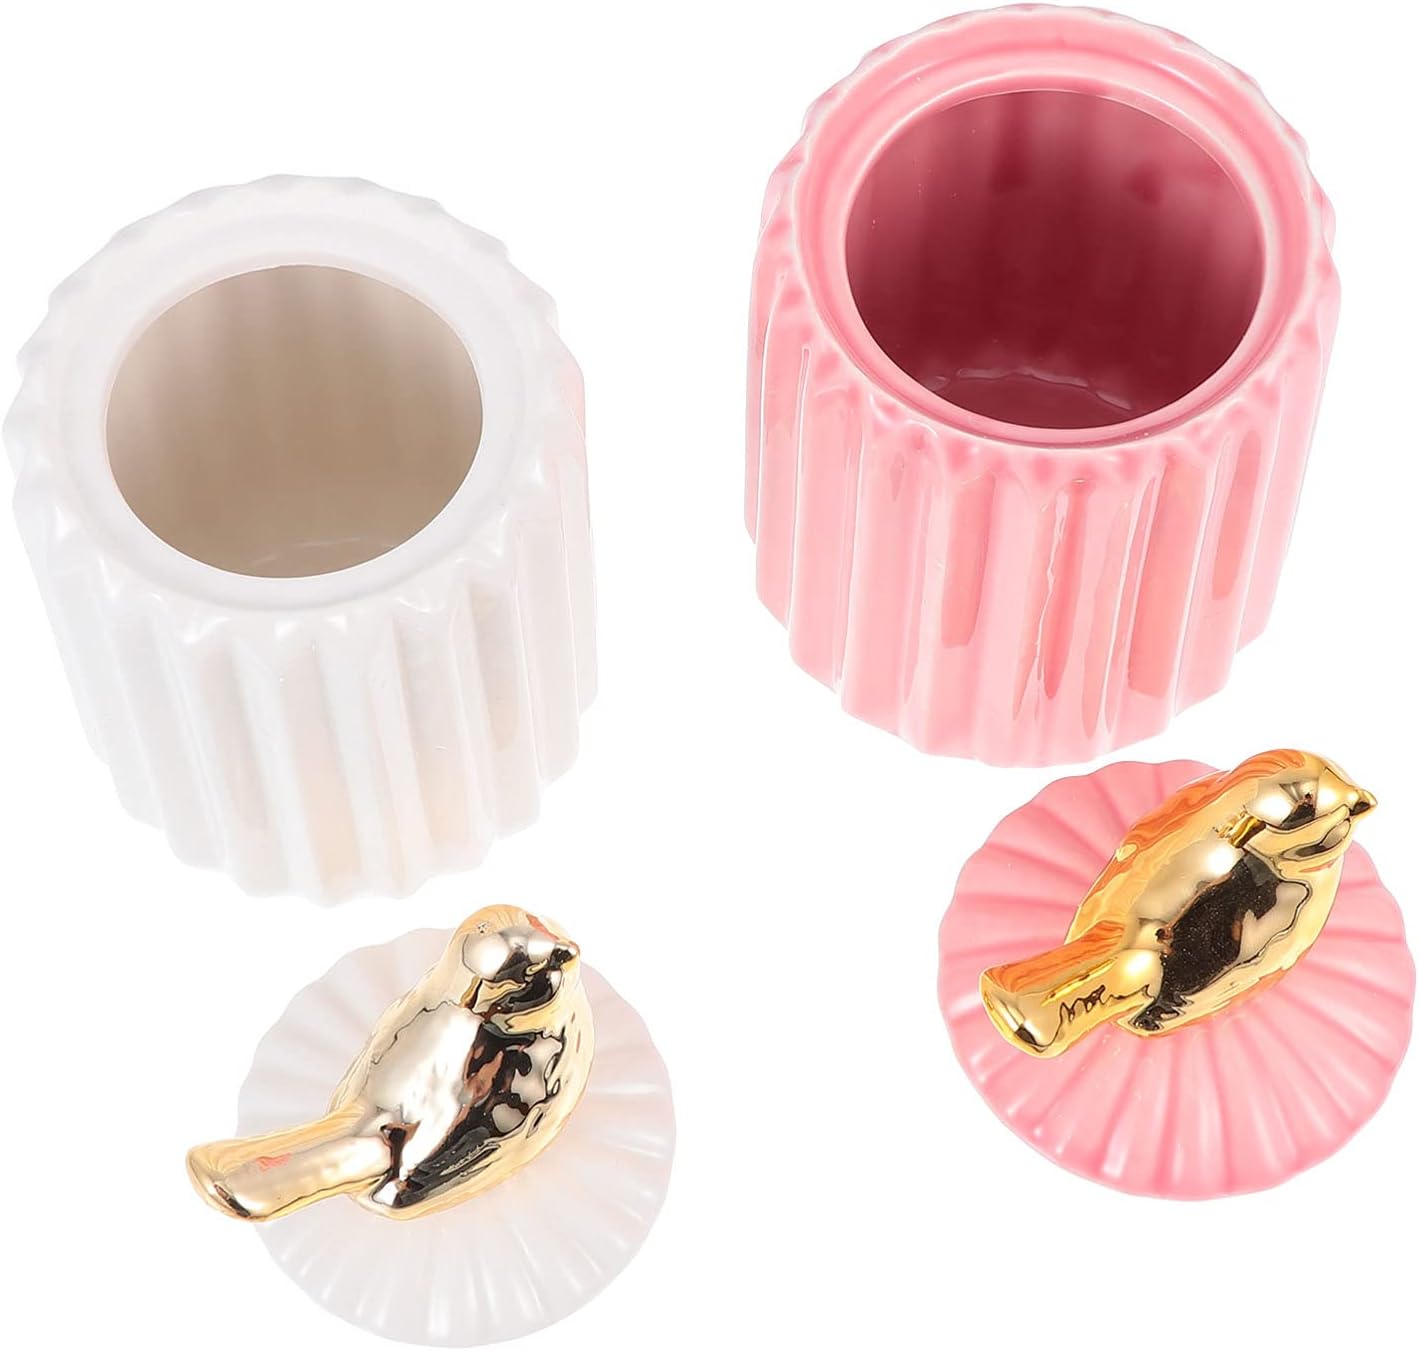 Zerodeko Ceramic Kitchen Canister Food Jars: Porcelain Can Airtight Storage Tank with Lid for Honey Coffee Sugar Wedding Table Centerpiece Pink